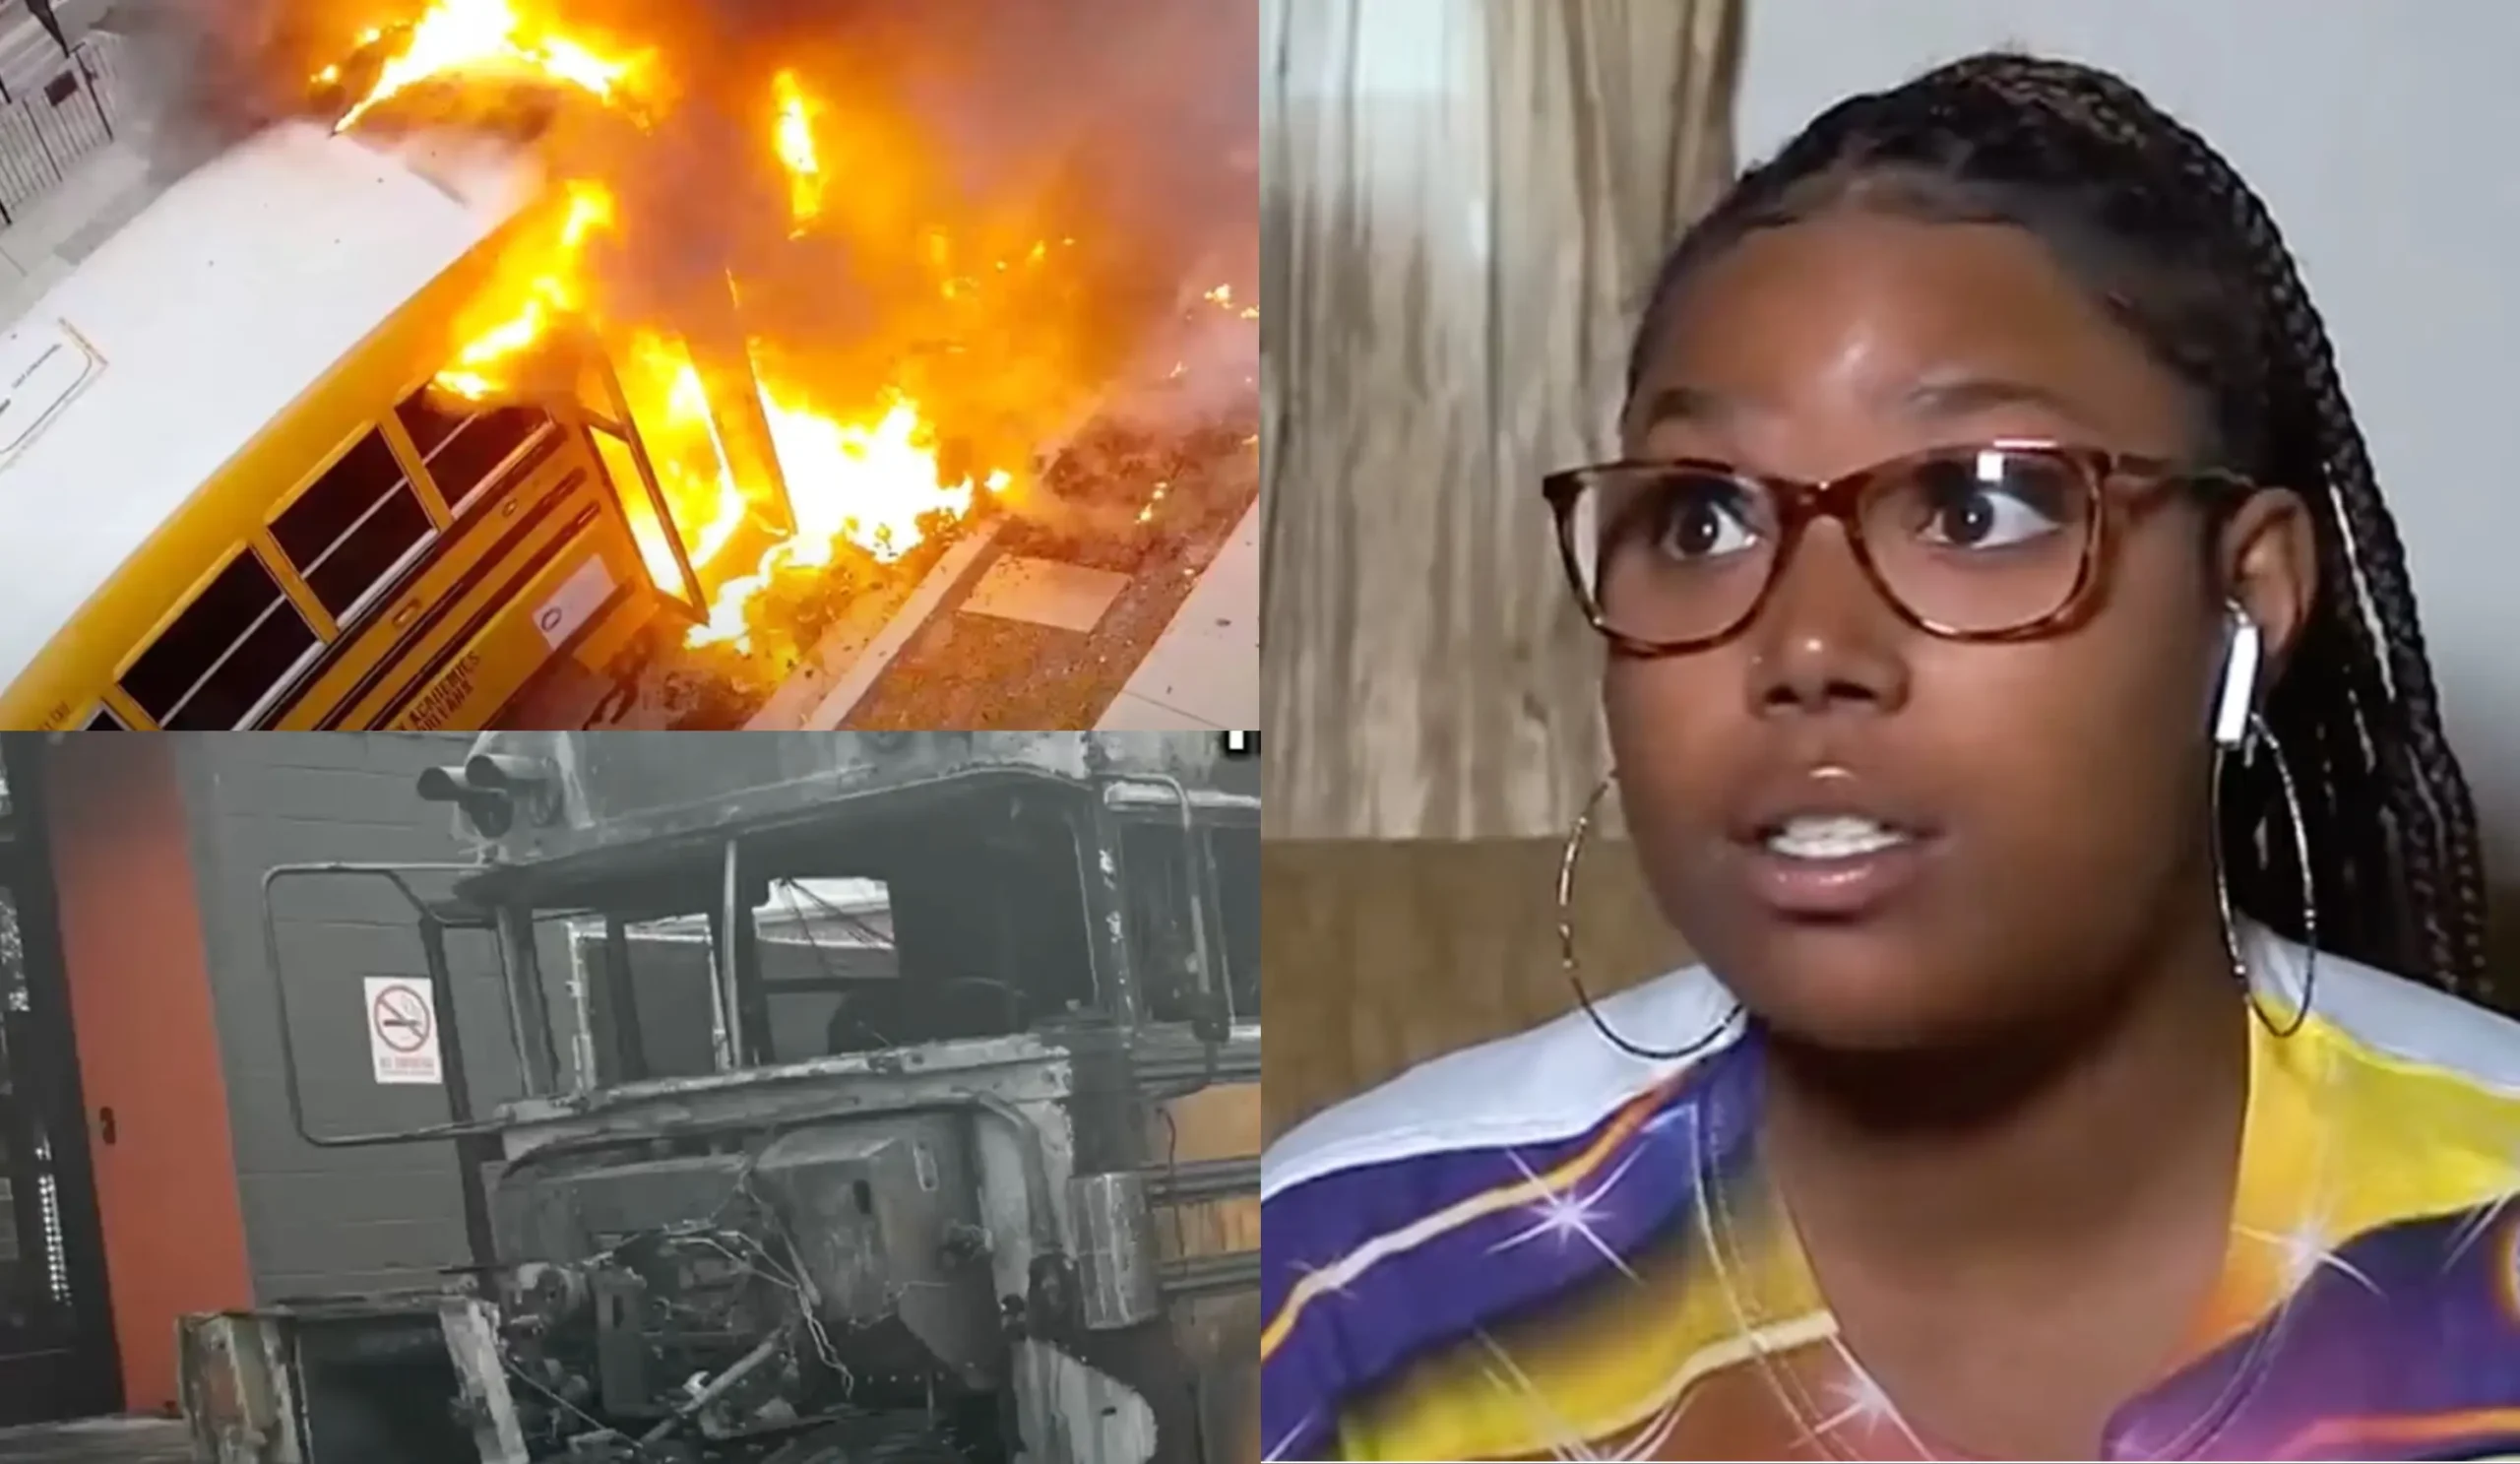 Louisiana Bus Driver Saves Kids From Burning Bus